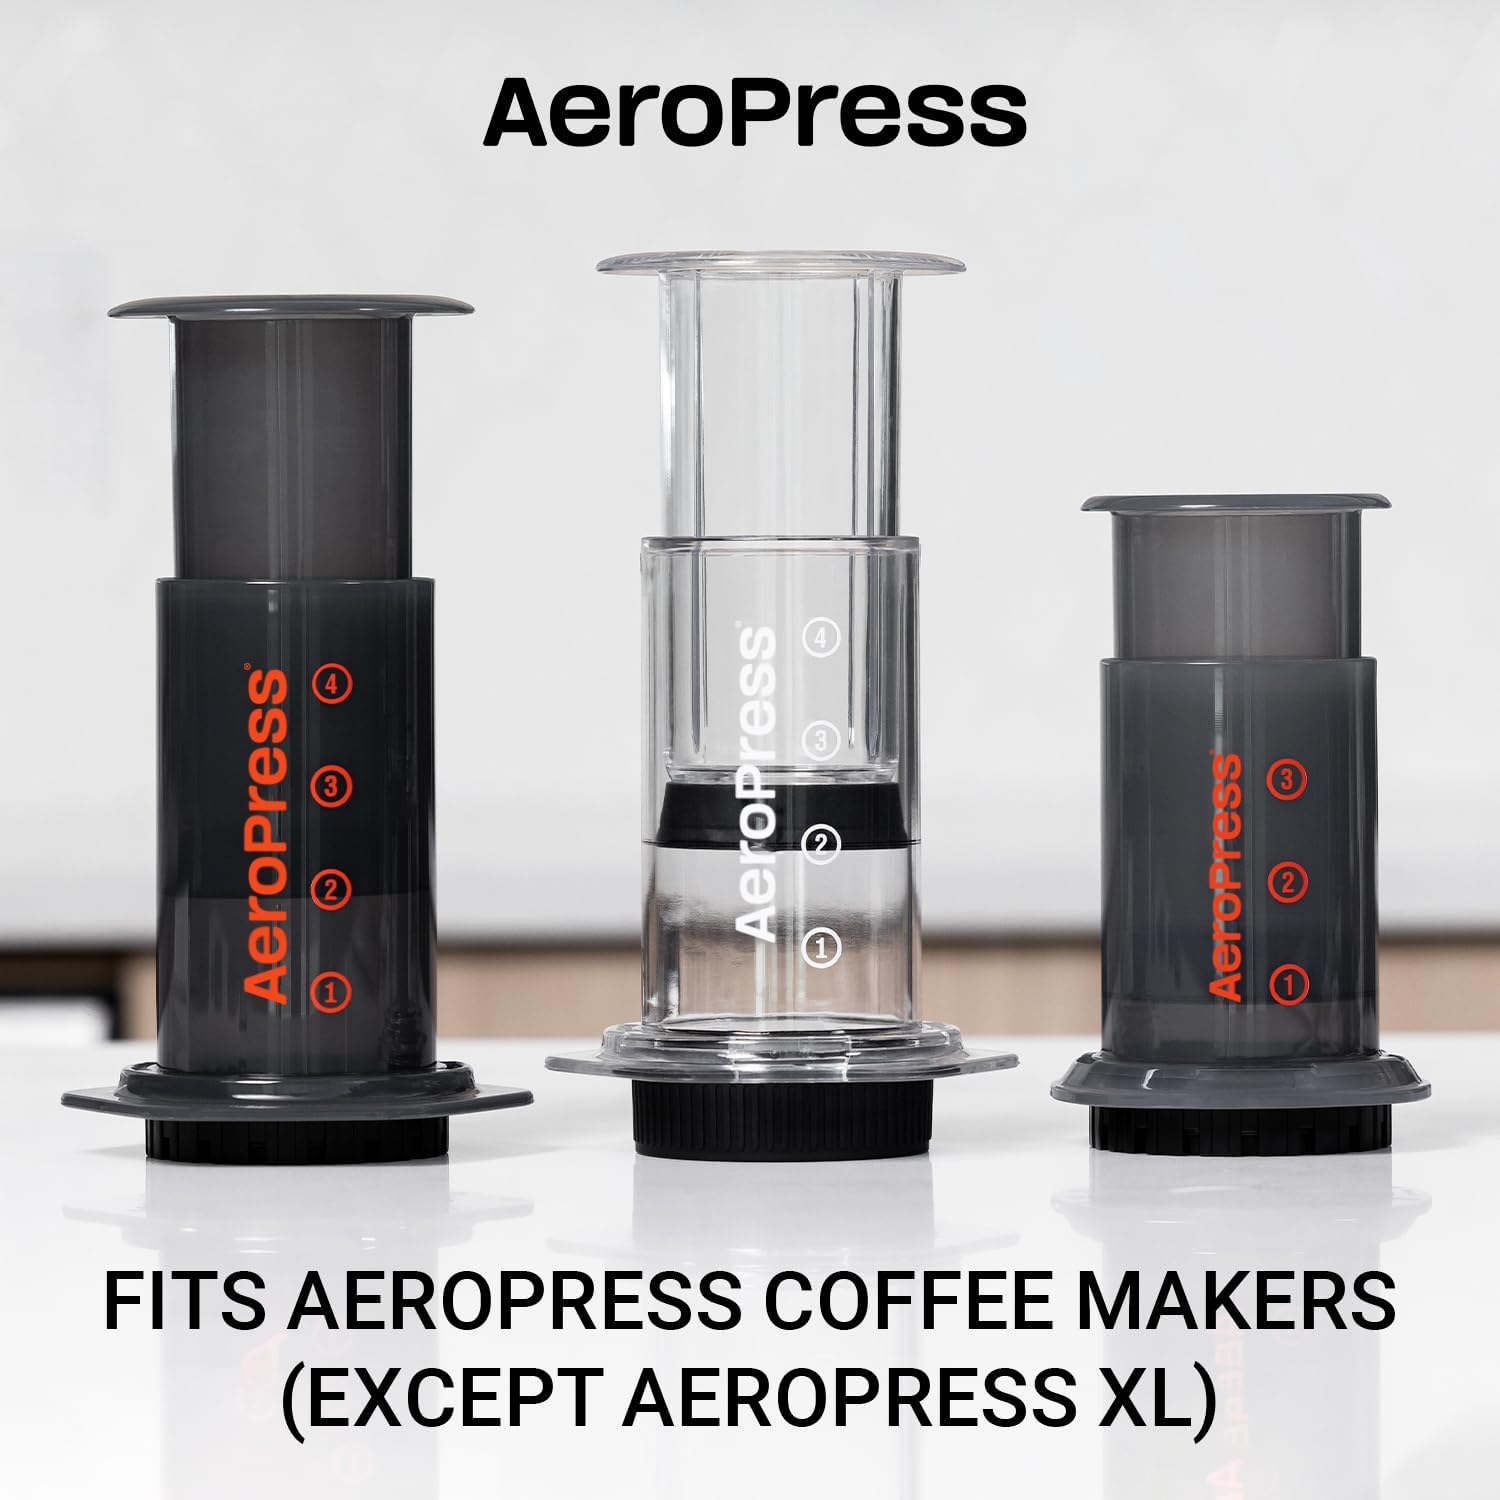 AeroPress Replacement Filter Pack - Microfilters For AeroPress Coffee And Espresso Maker - 2 Pack (700 count)